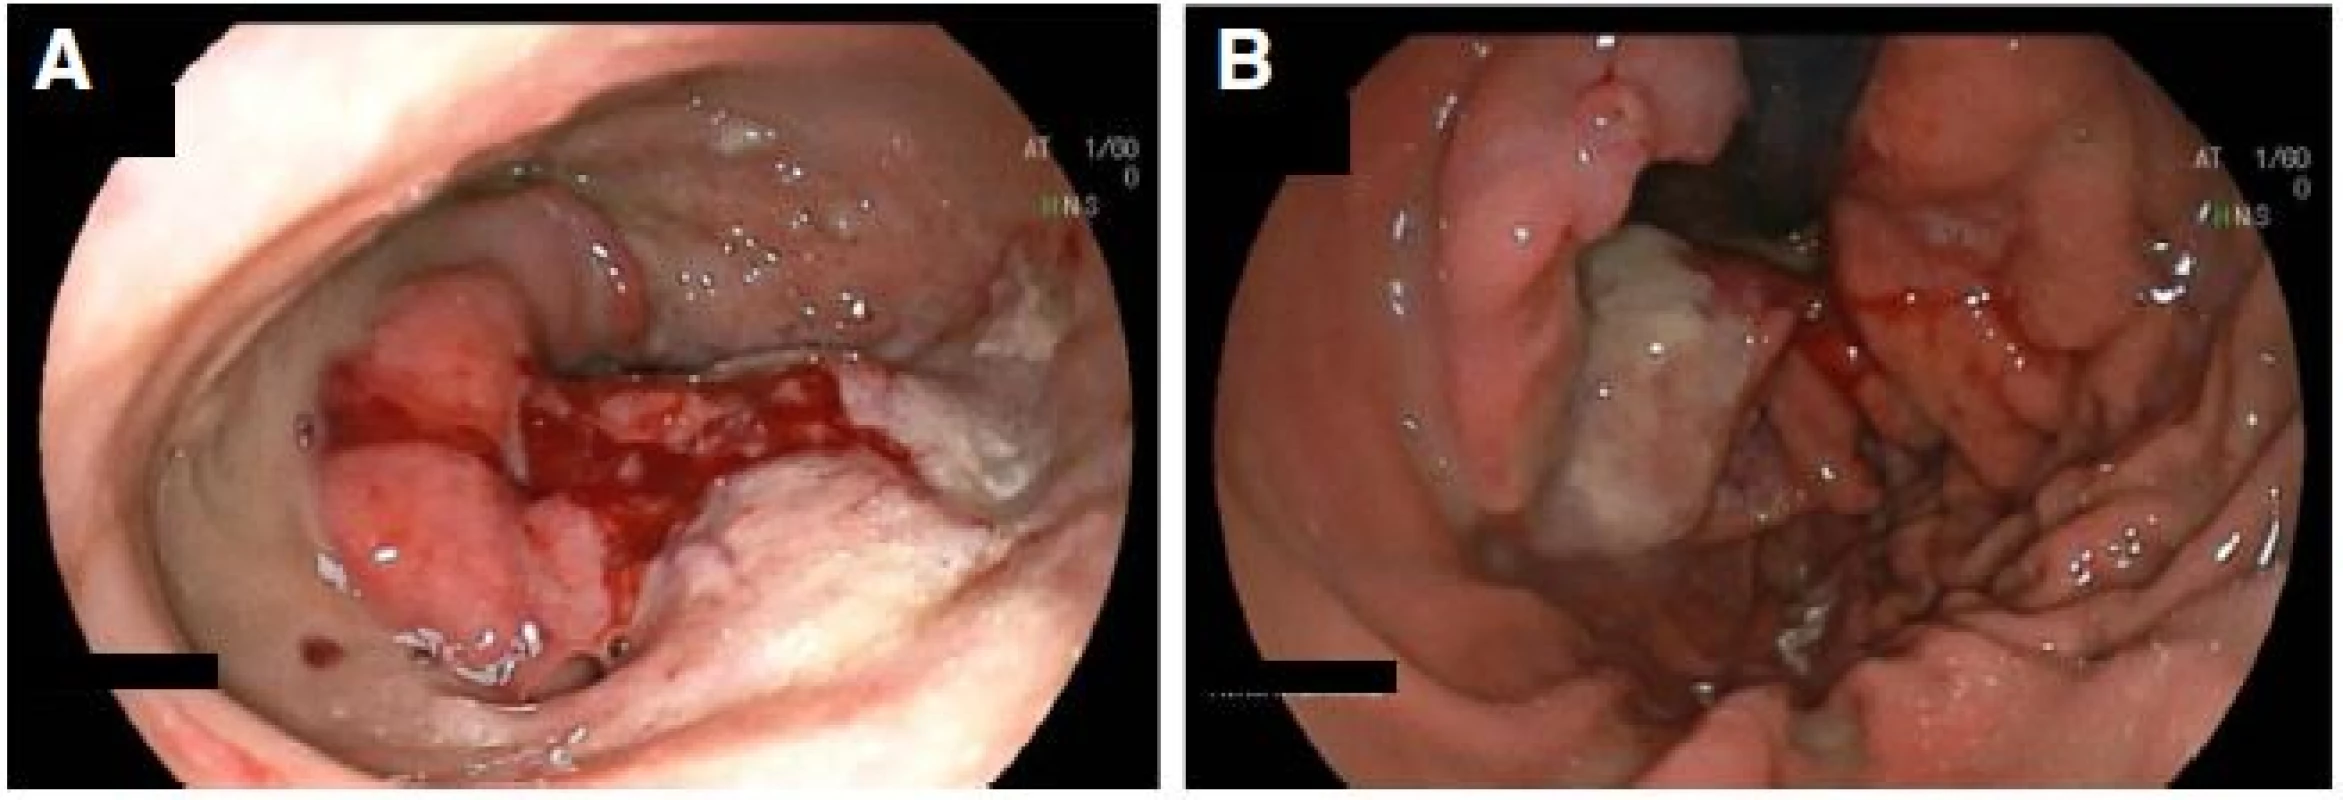 Gastroscopy showing a ulcerating mass within a hiatus hernia, and b view on endoscopic retroversion